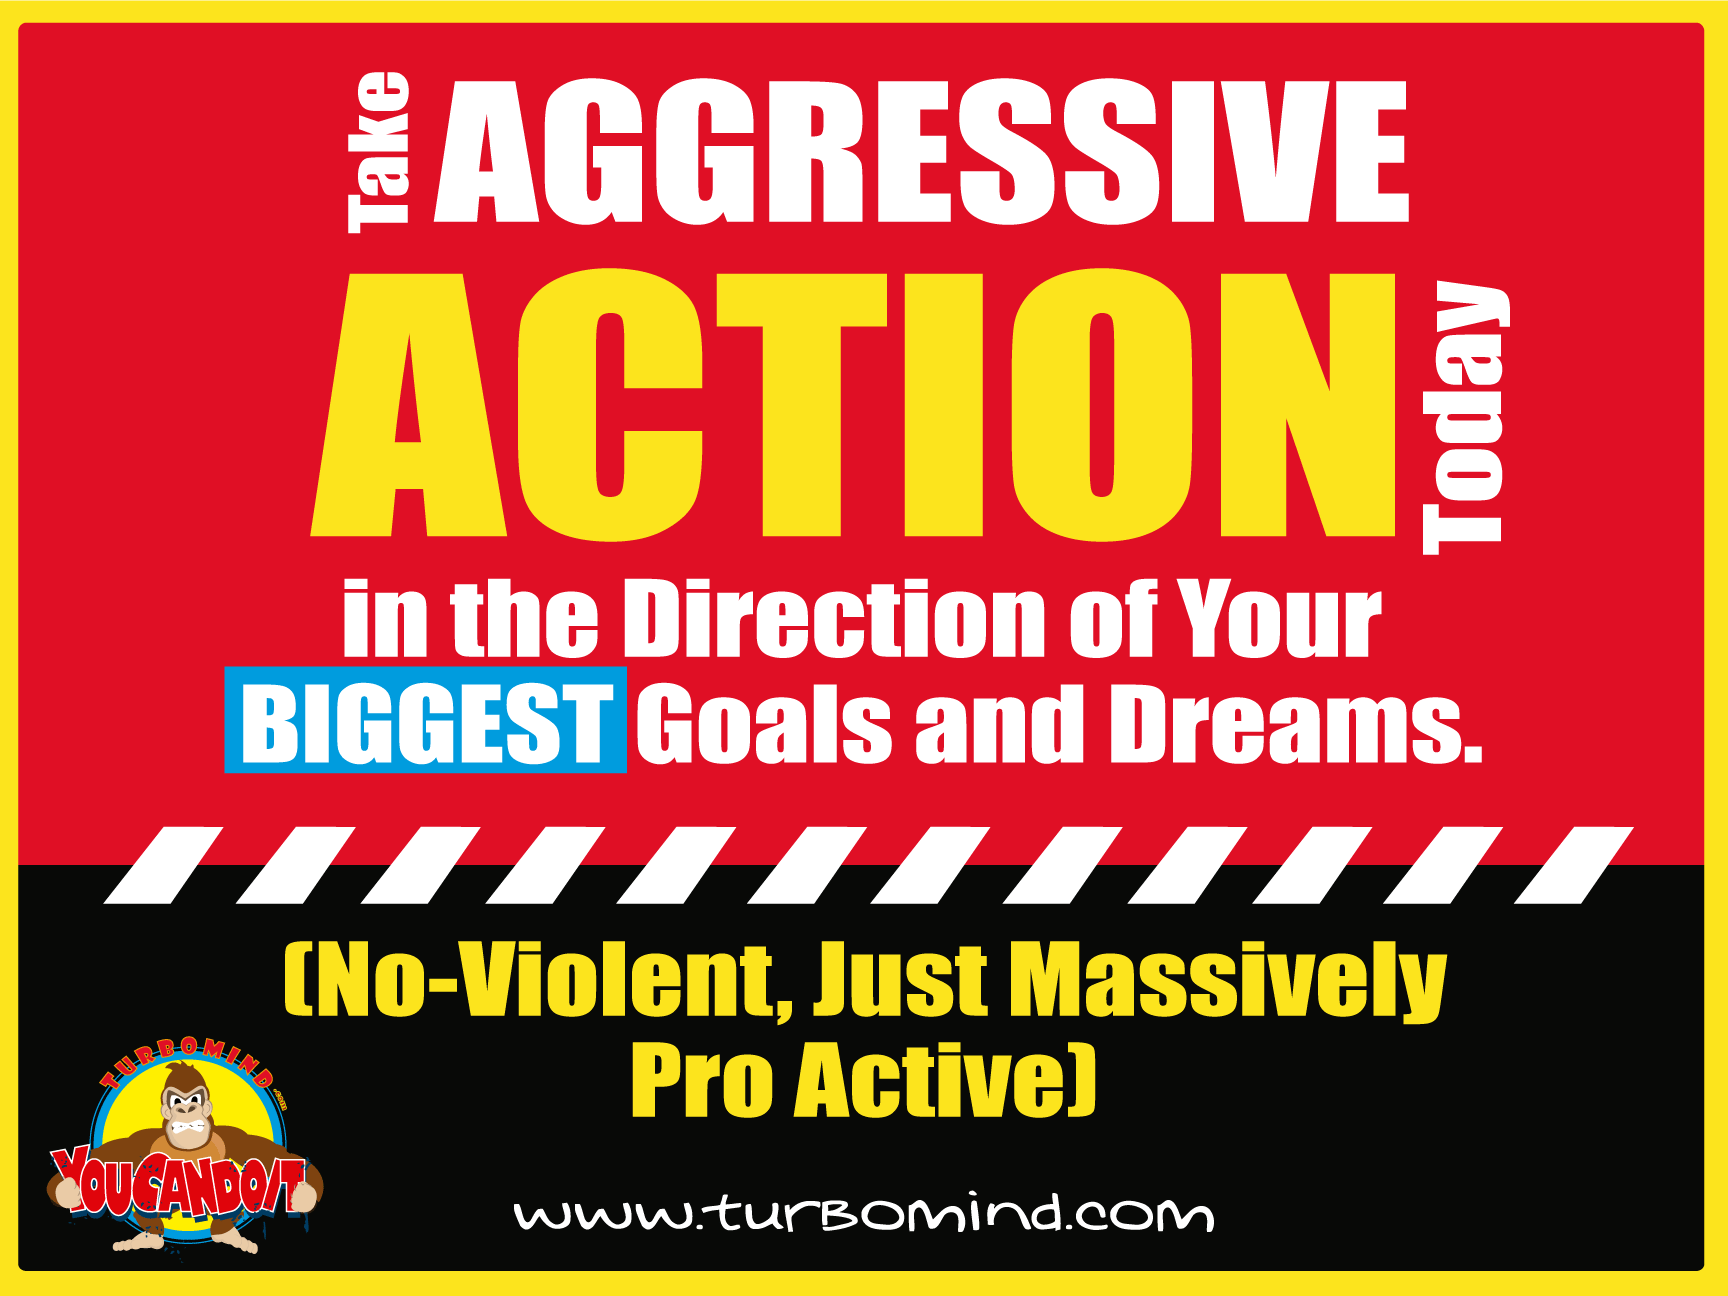 TAKE AGGRESSIVE ACTION IN THE DIRECTION OF YOUR DREAMS